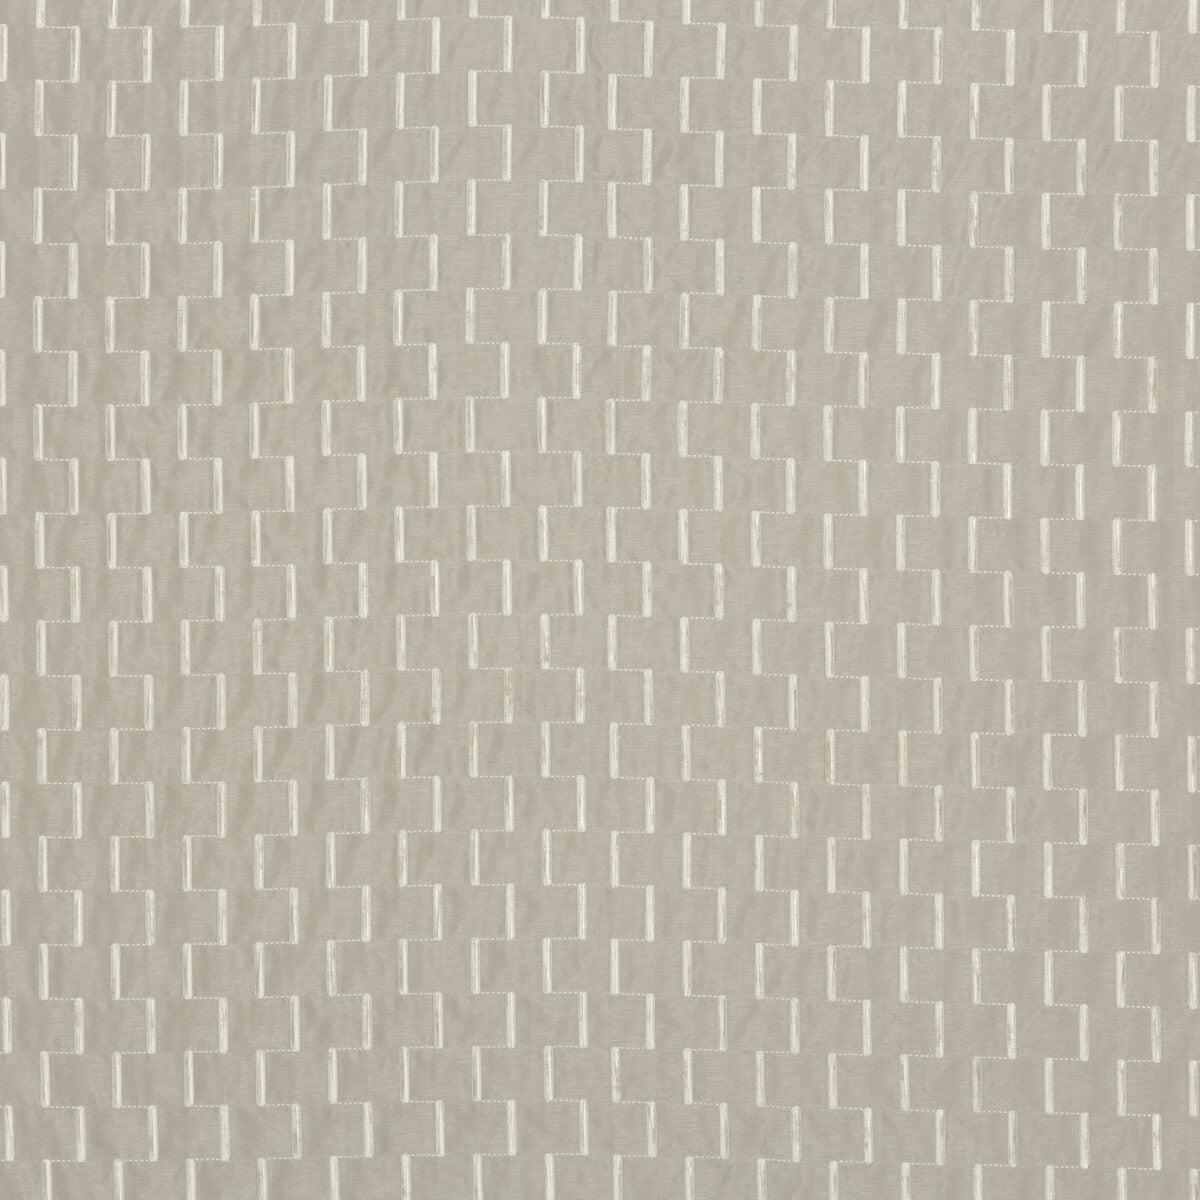 Kirov fabric in silver color - pattern BF10602.925.0 - by G P &amp; J Baker in the Cosmopolitan collection